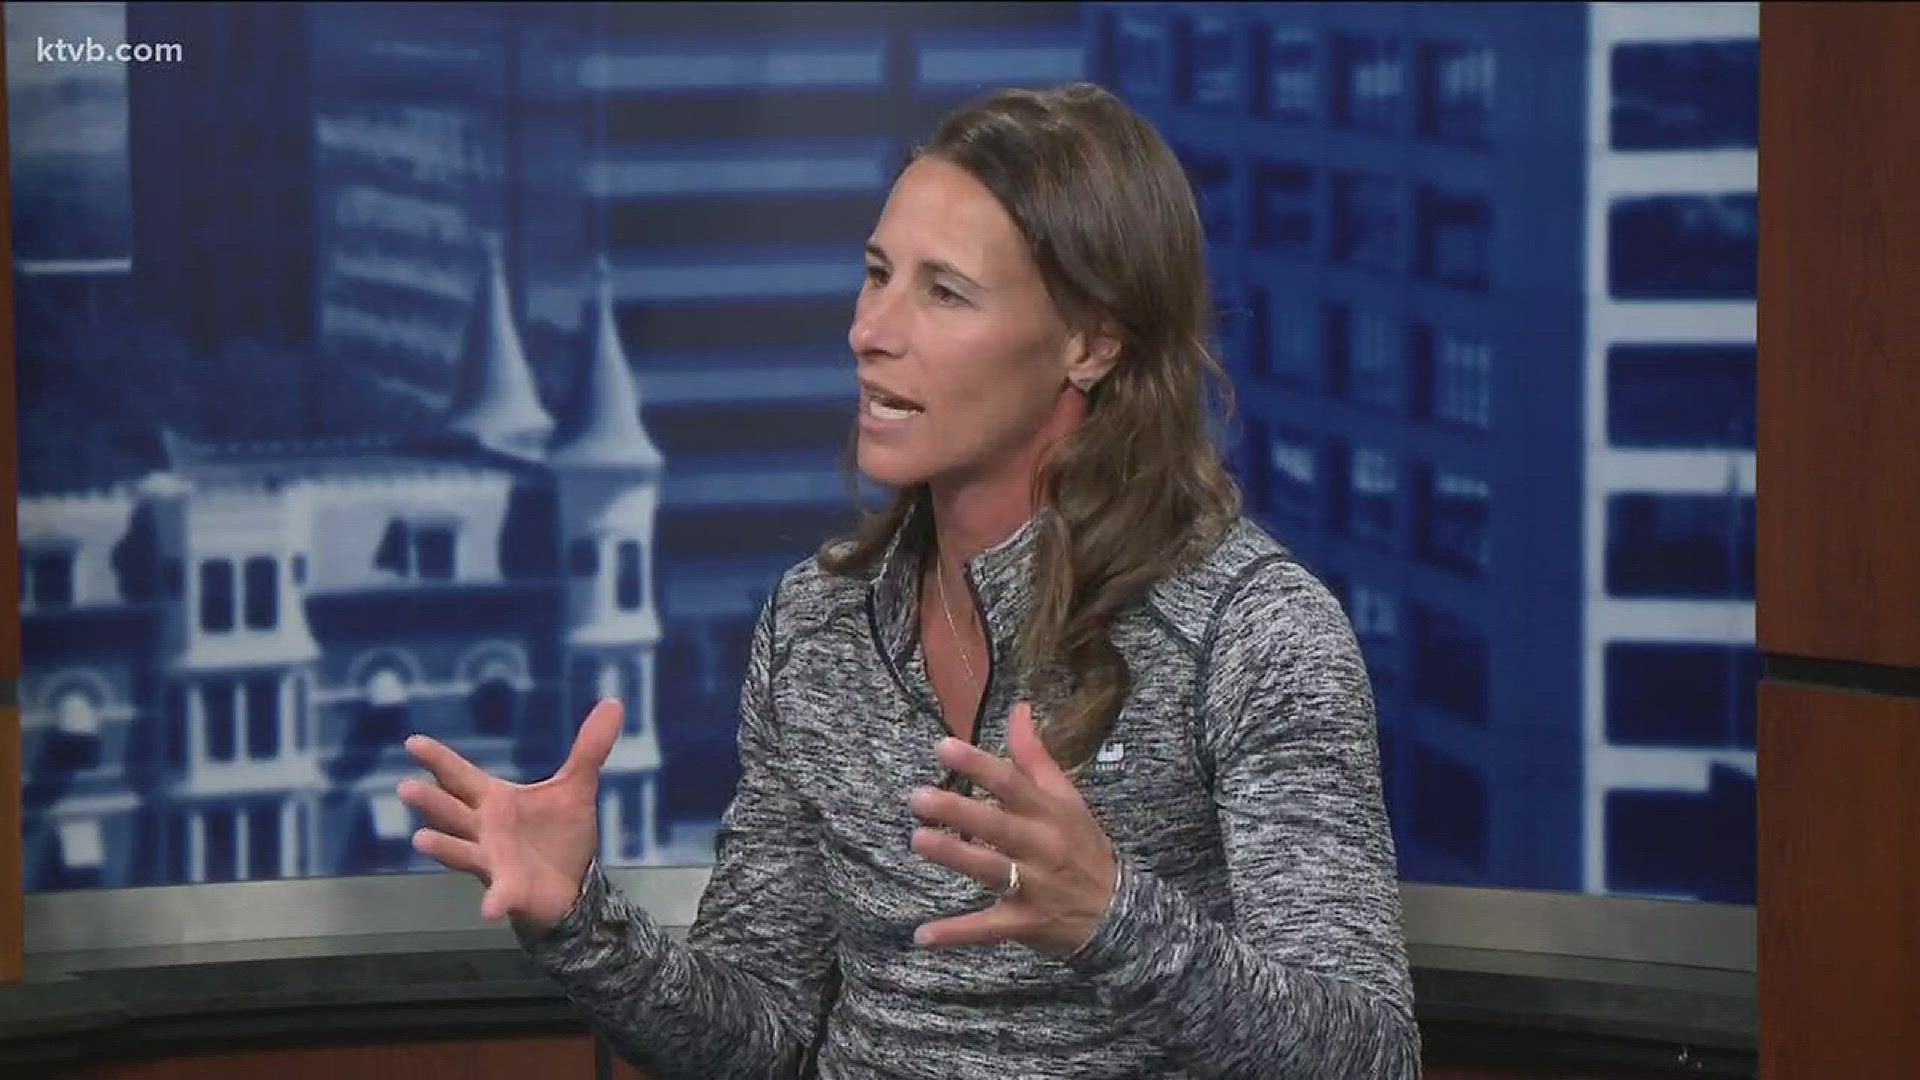 Olympic gold medalist pole vaulter Stacy Dragila joined Mark Johnson on the News at 4 to talk about her new passion: a nonprofit called "Chase Your Dreams."